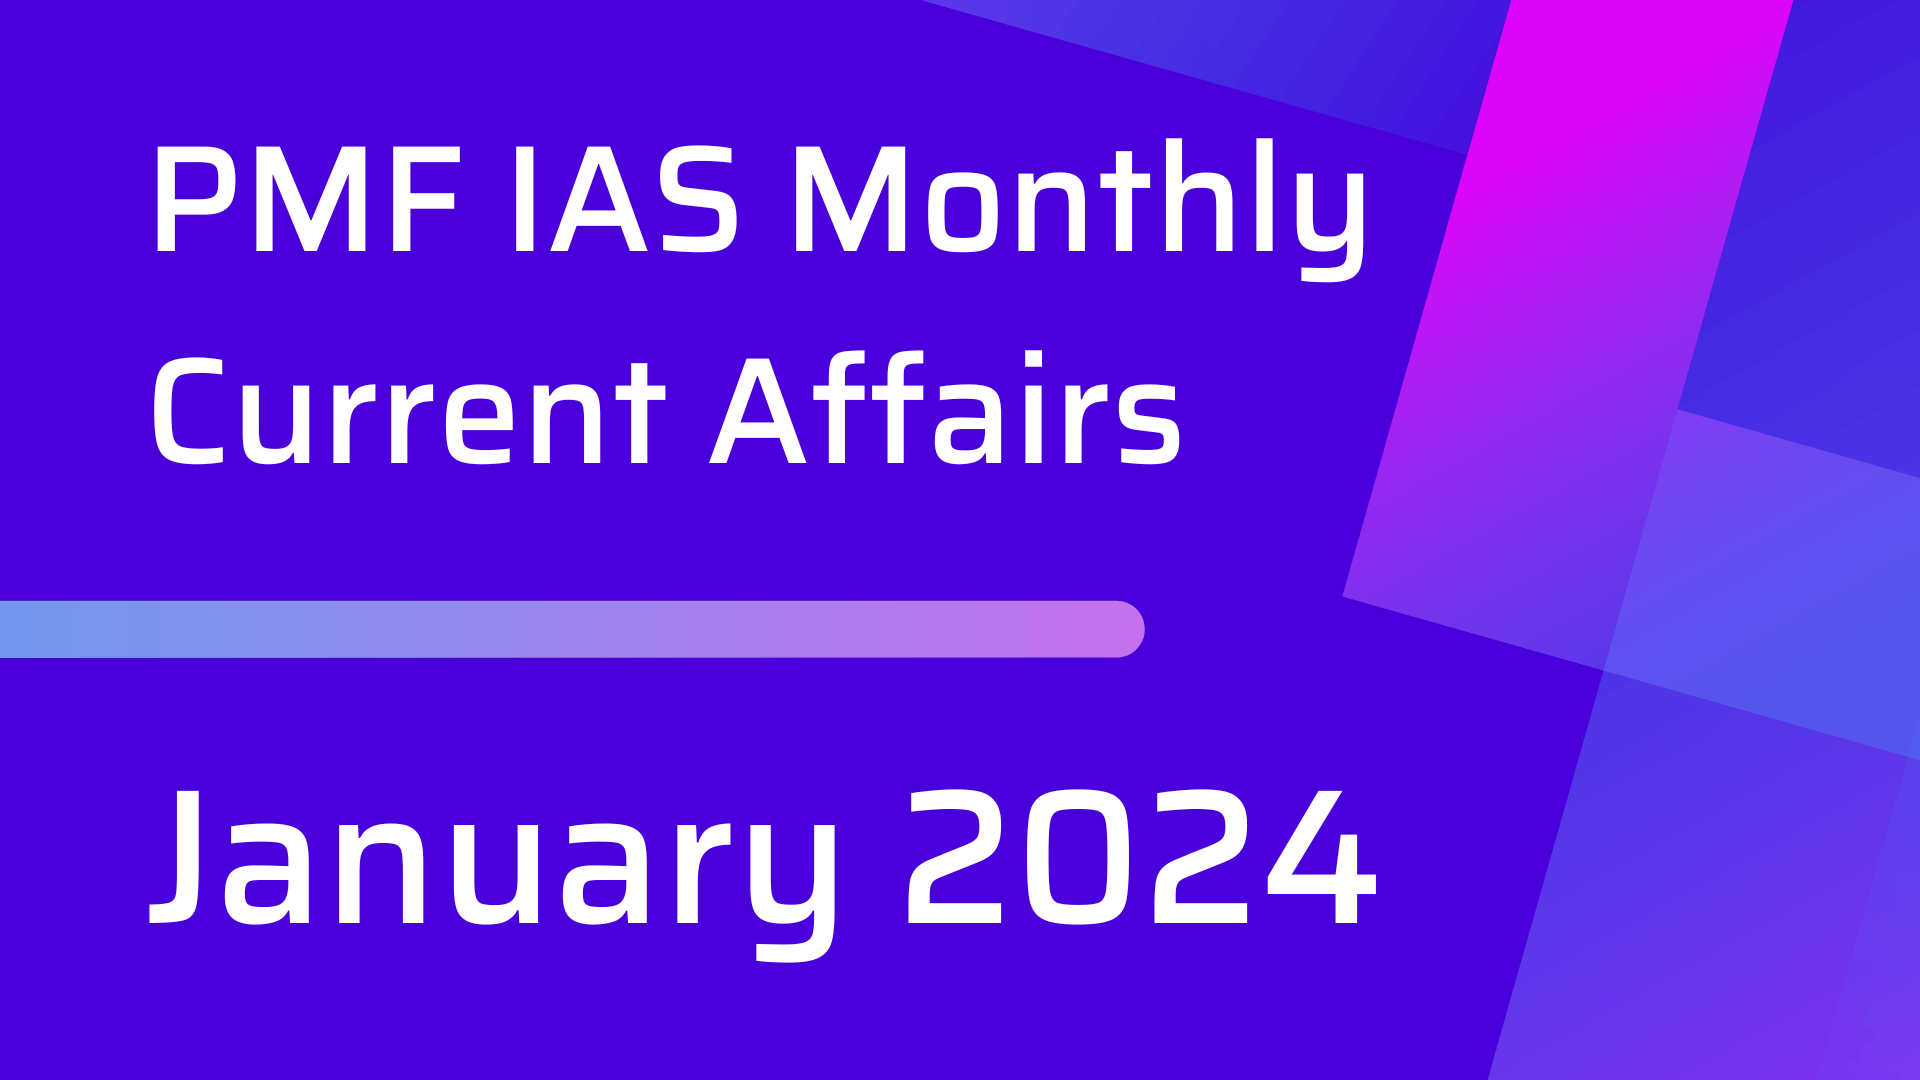 PMF IAS Daily Current Affairs January 2024